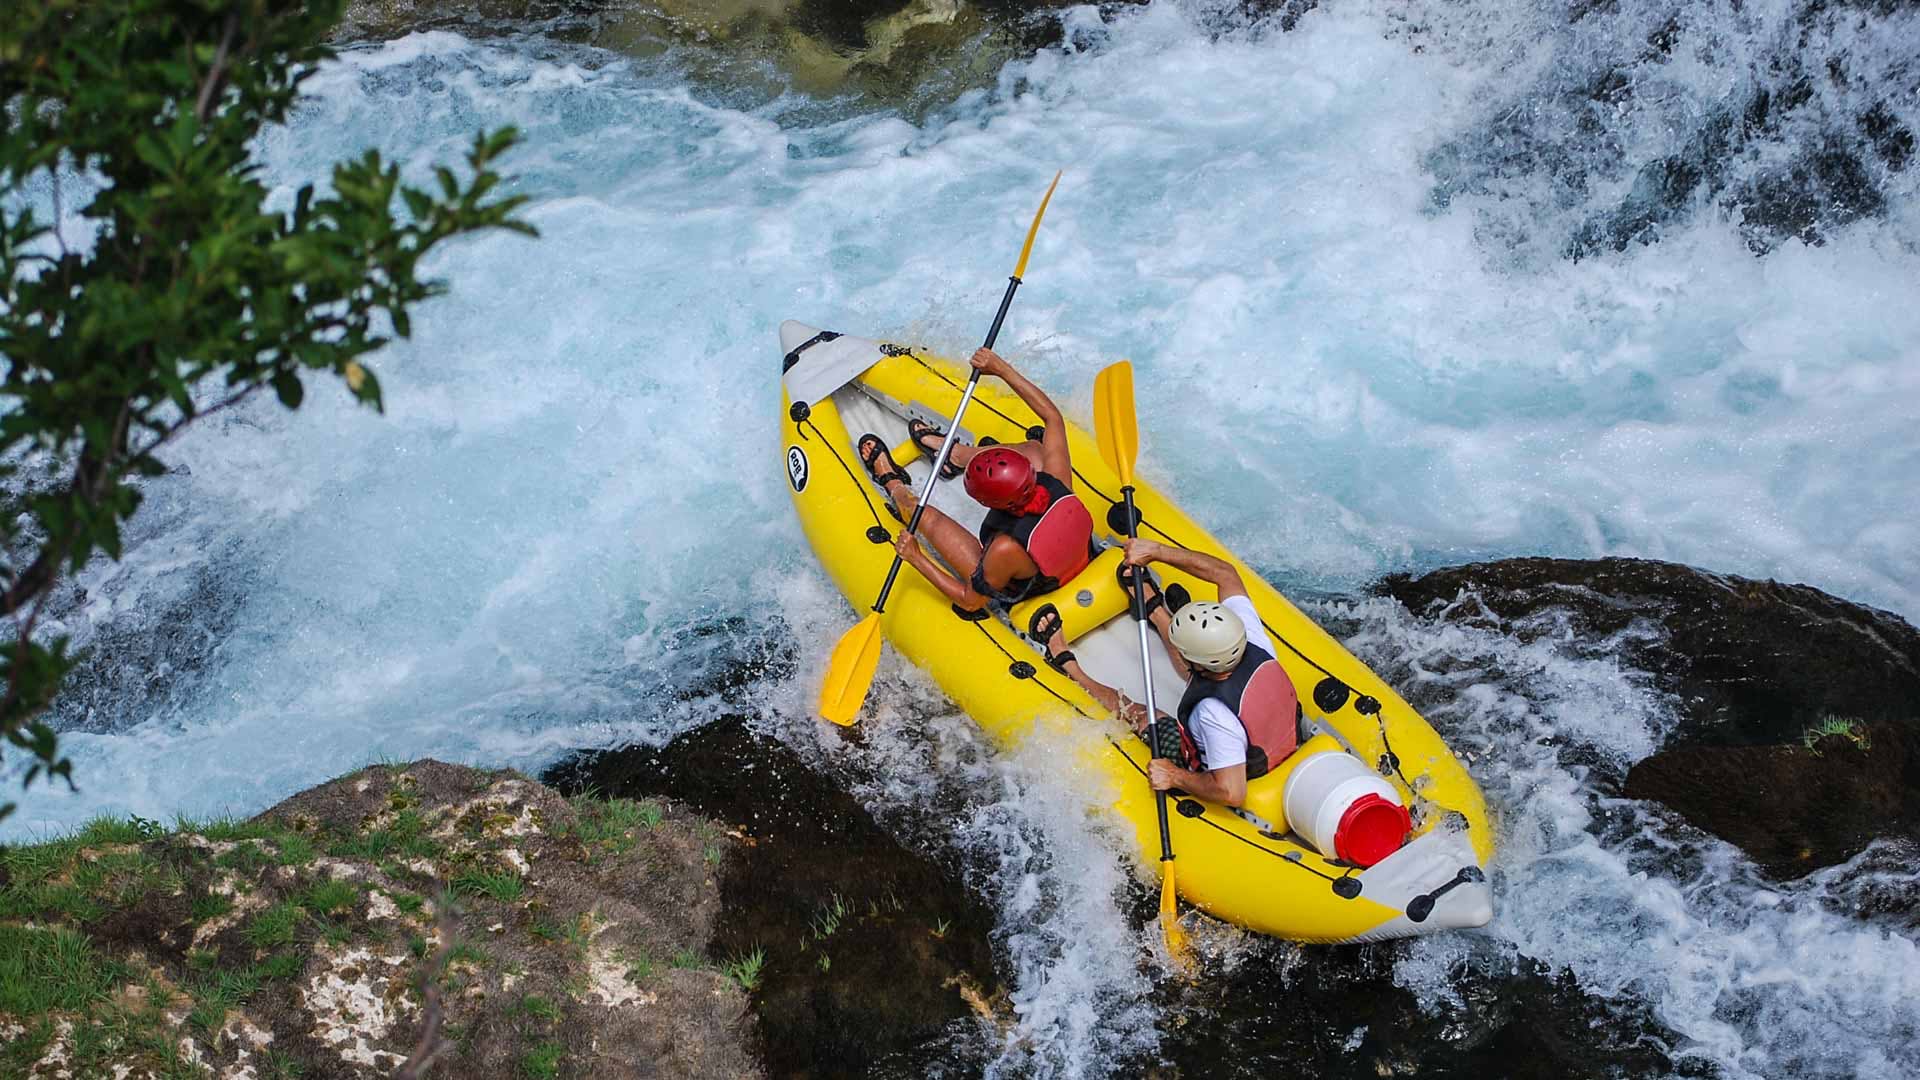 A rapid on the Zrmanja River. Photo: Much Better Adventures.